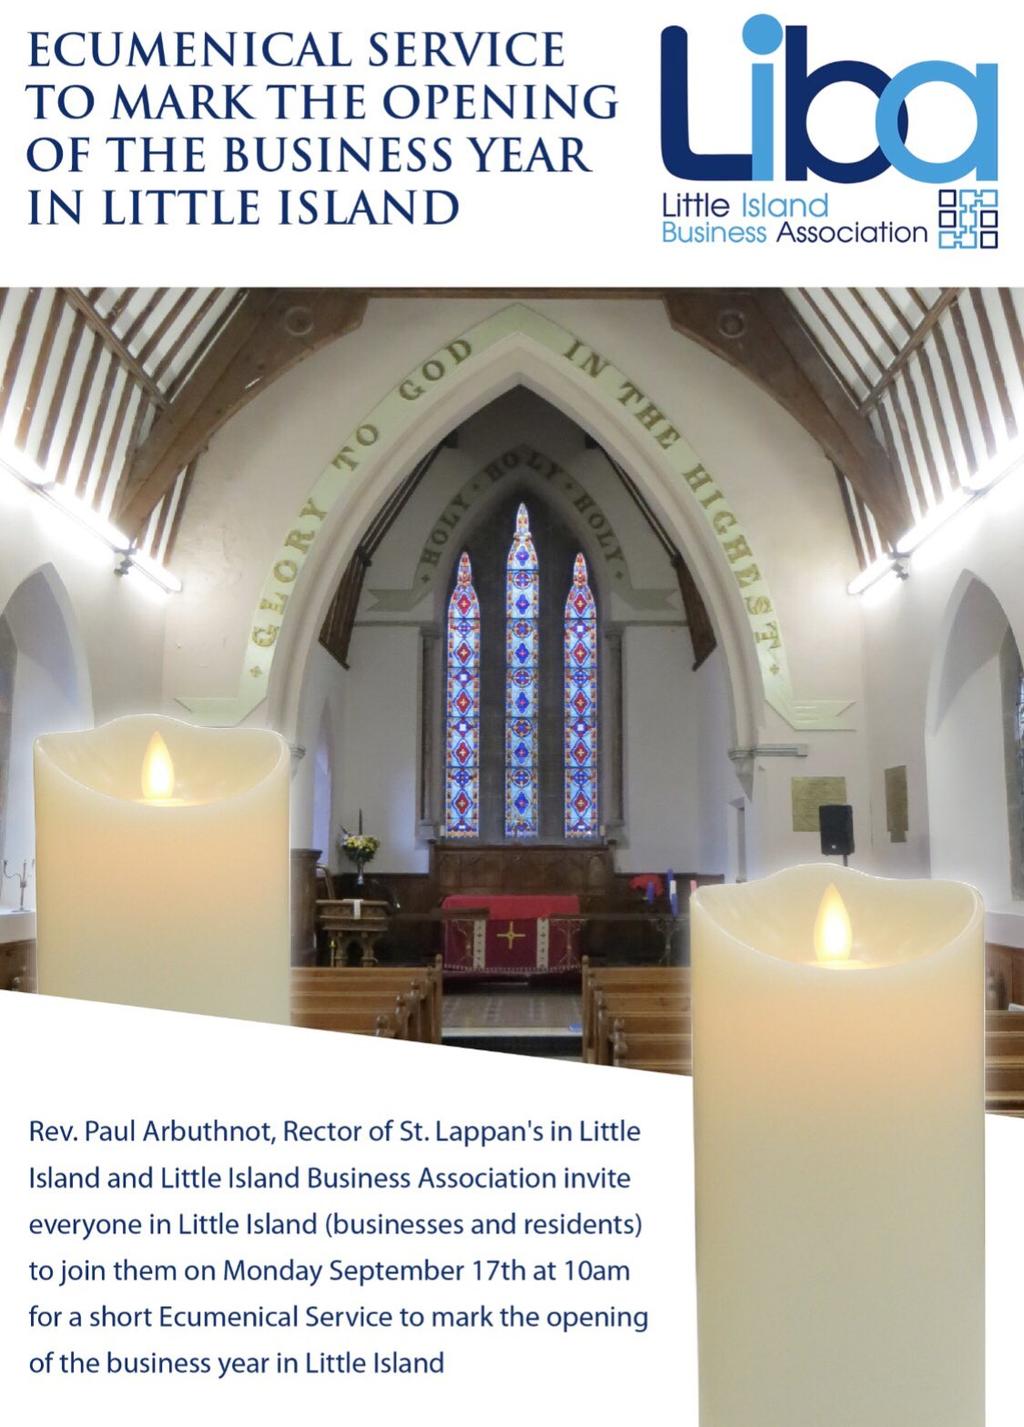 +++Children s Ministry Harvest Newsletter - The Church of Ireland Children s Ministry Harvest Newsletter is now available and may be downloaded from the Church of Ireland website.